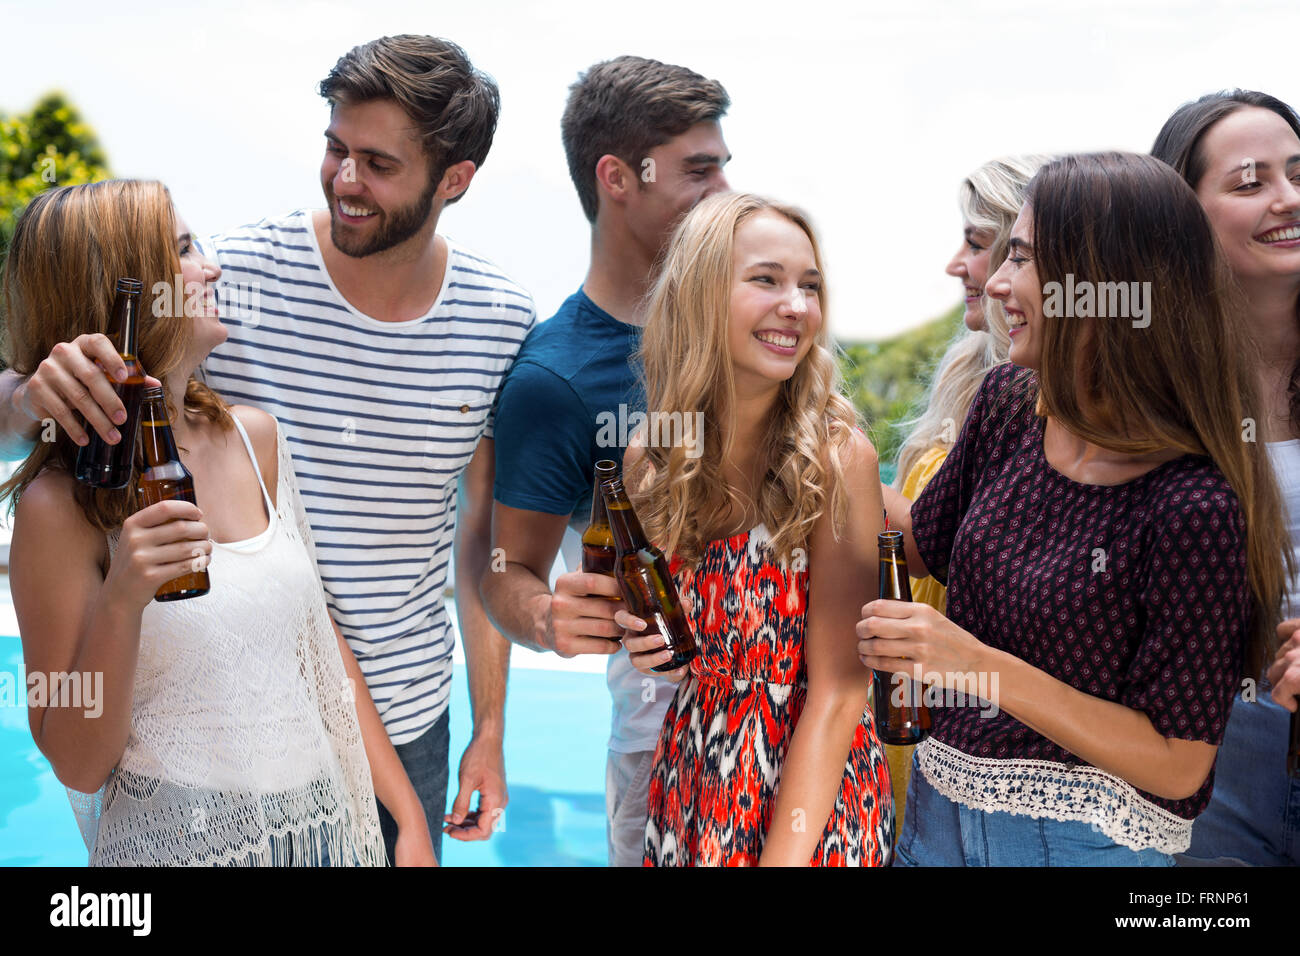 Group of happy friend holding beer bottles Stock Photo